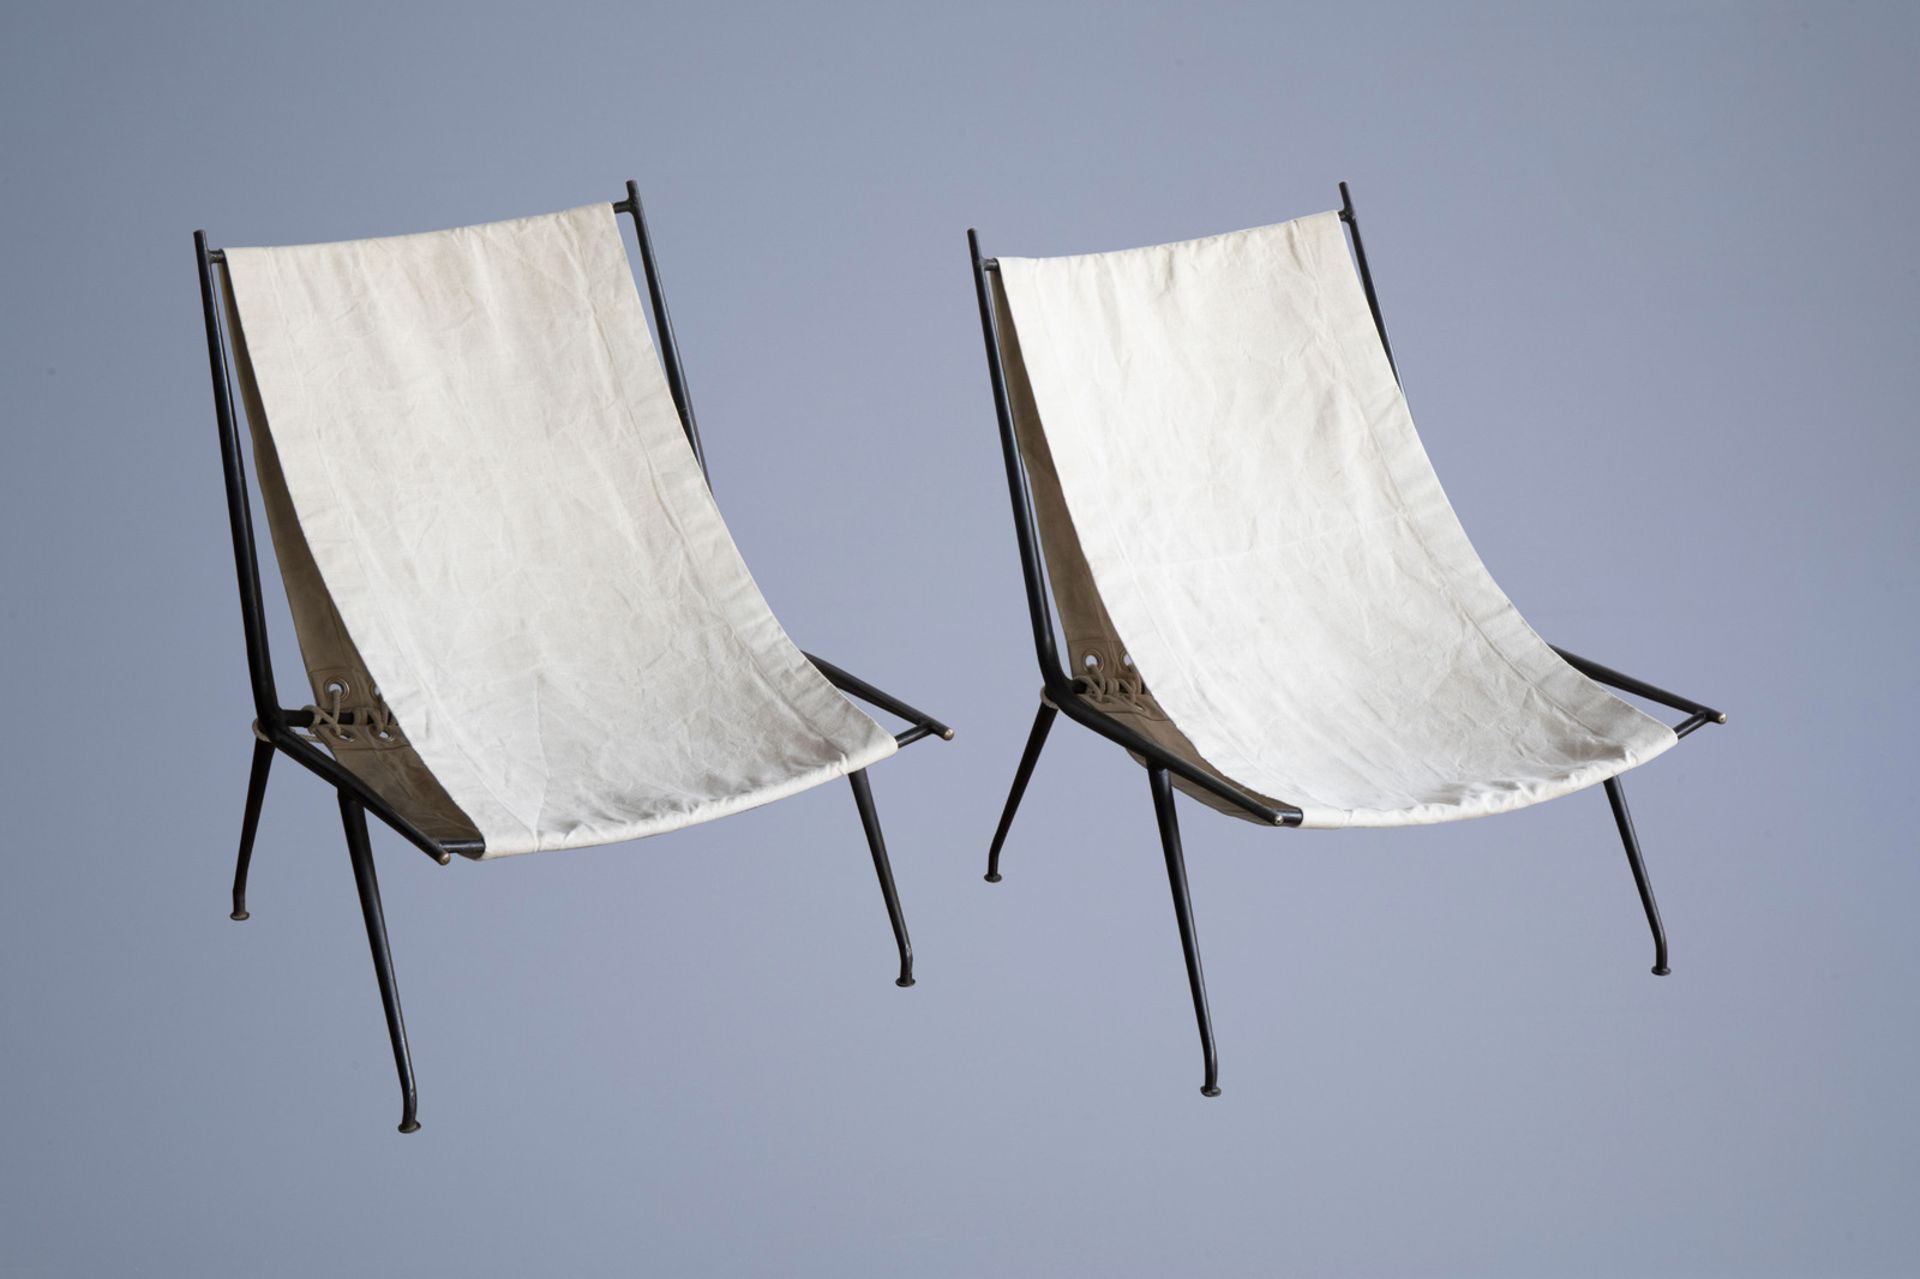 Attributed to Robert Mallet-Stevens (1886-1945): A pair of deckchairs in patinated metal and beige l